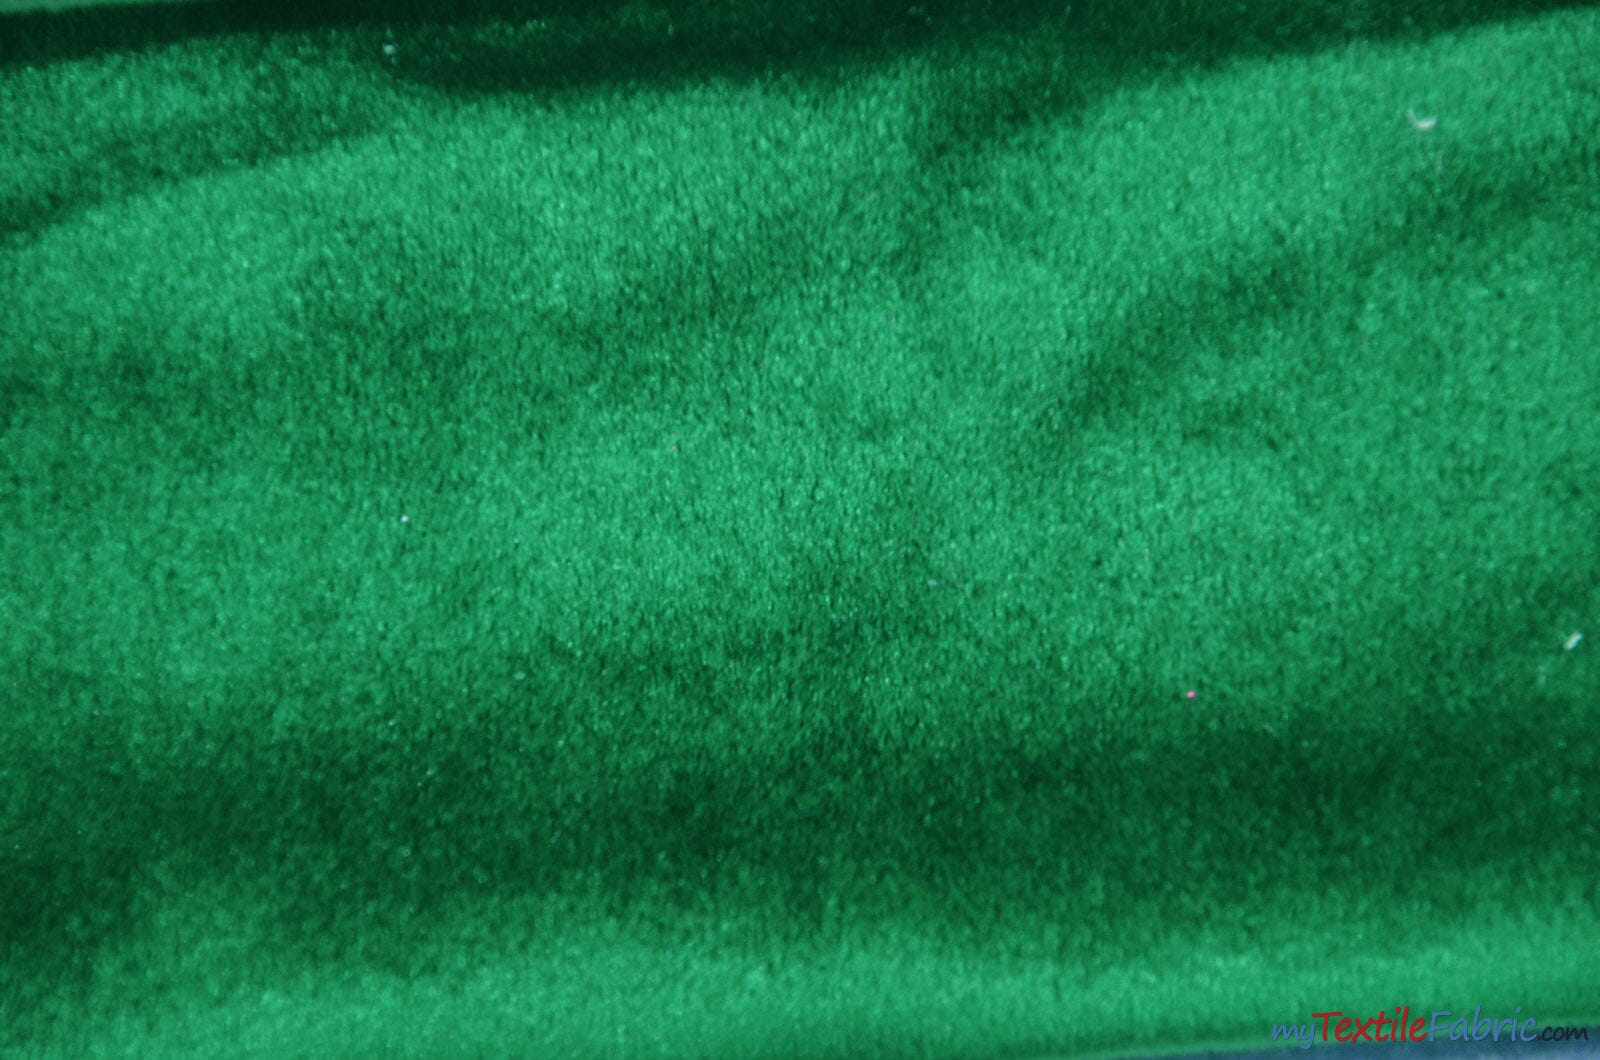 Hight Quality Stretch Velvet Fabric By The Roll (20 yards) Wholesale F